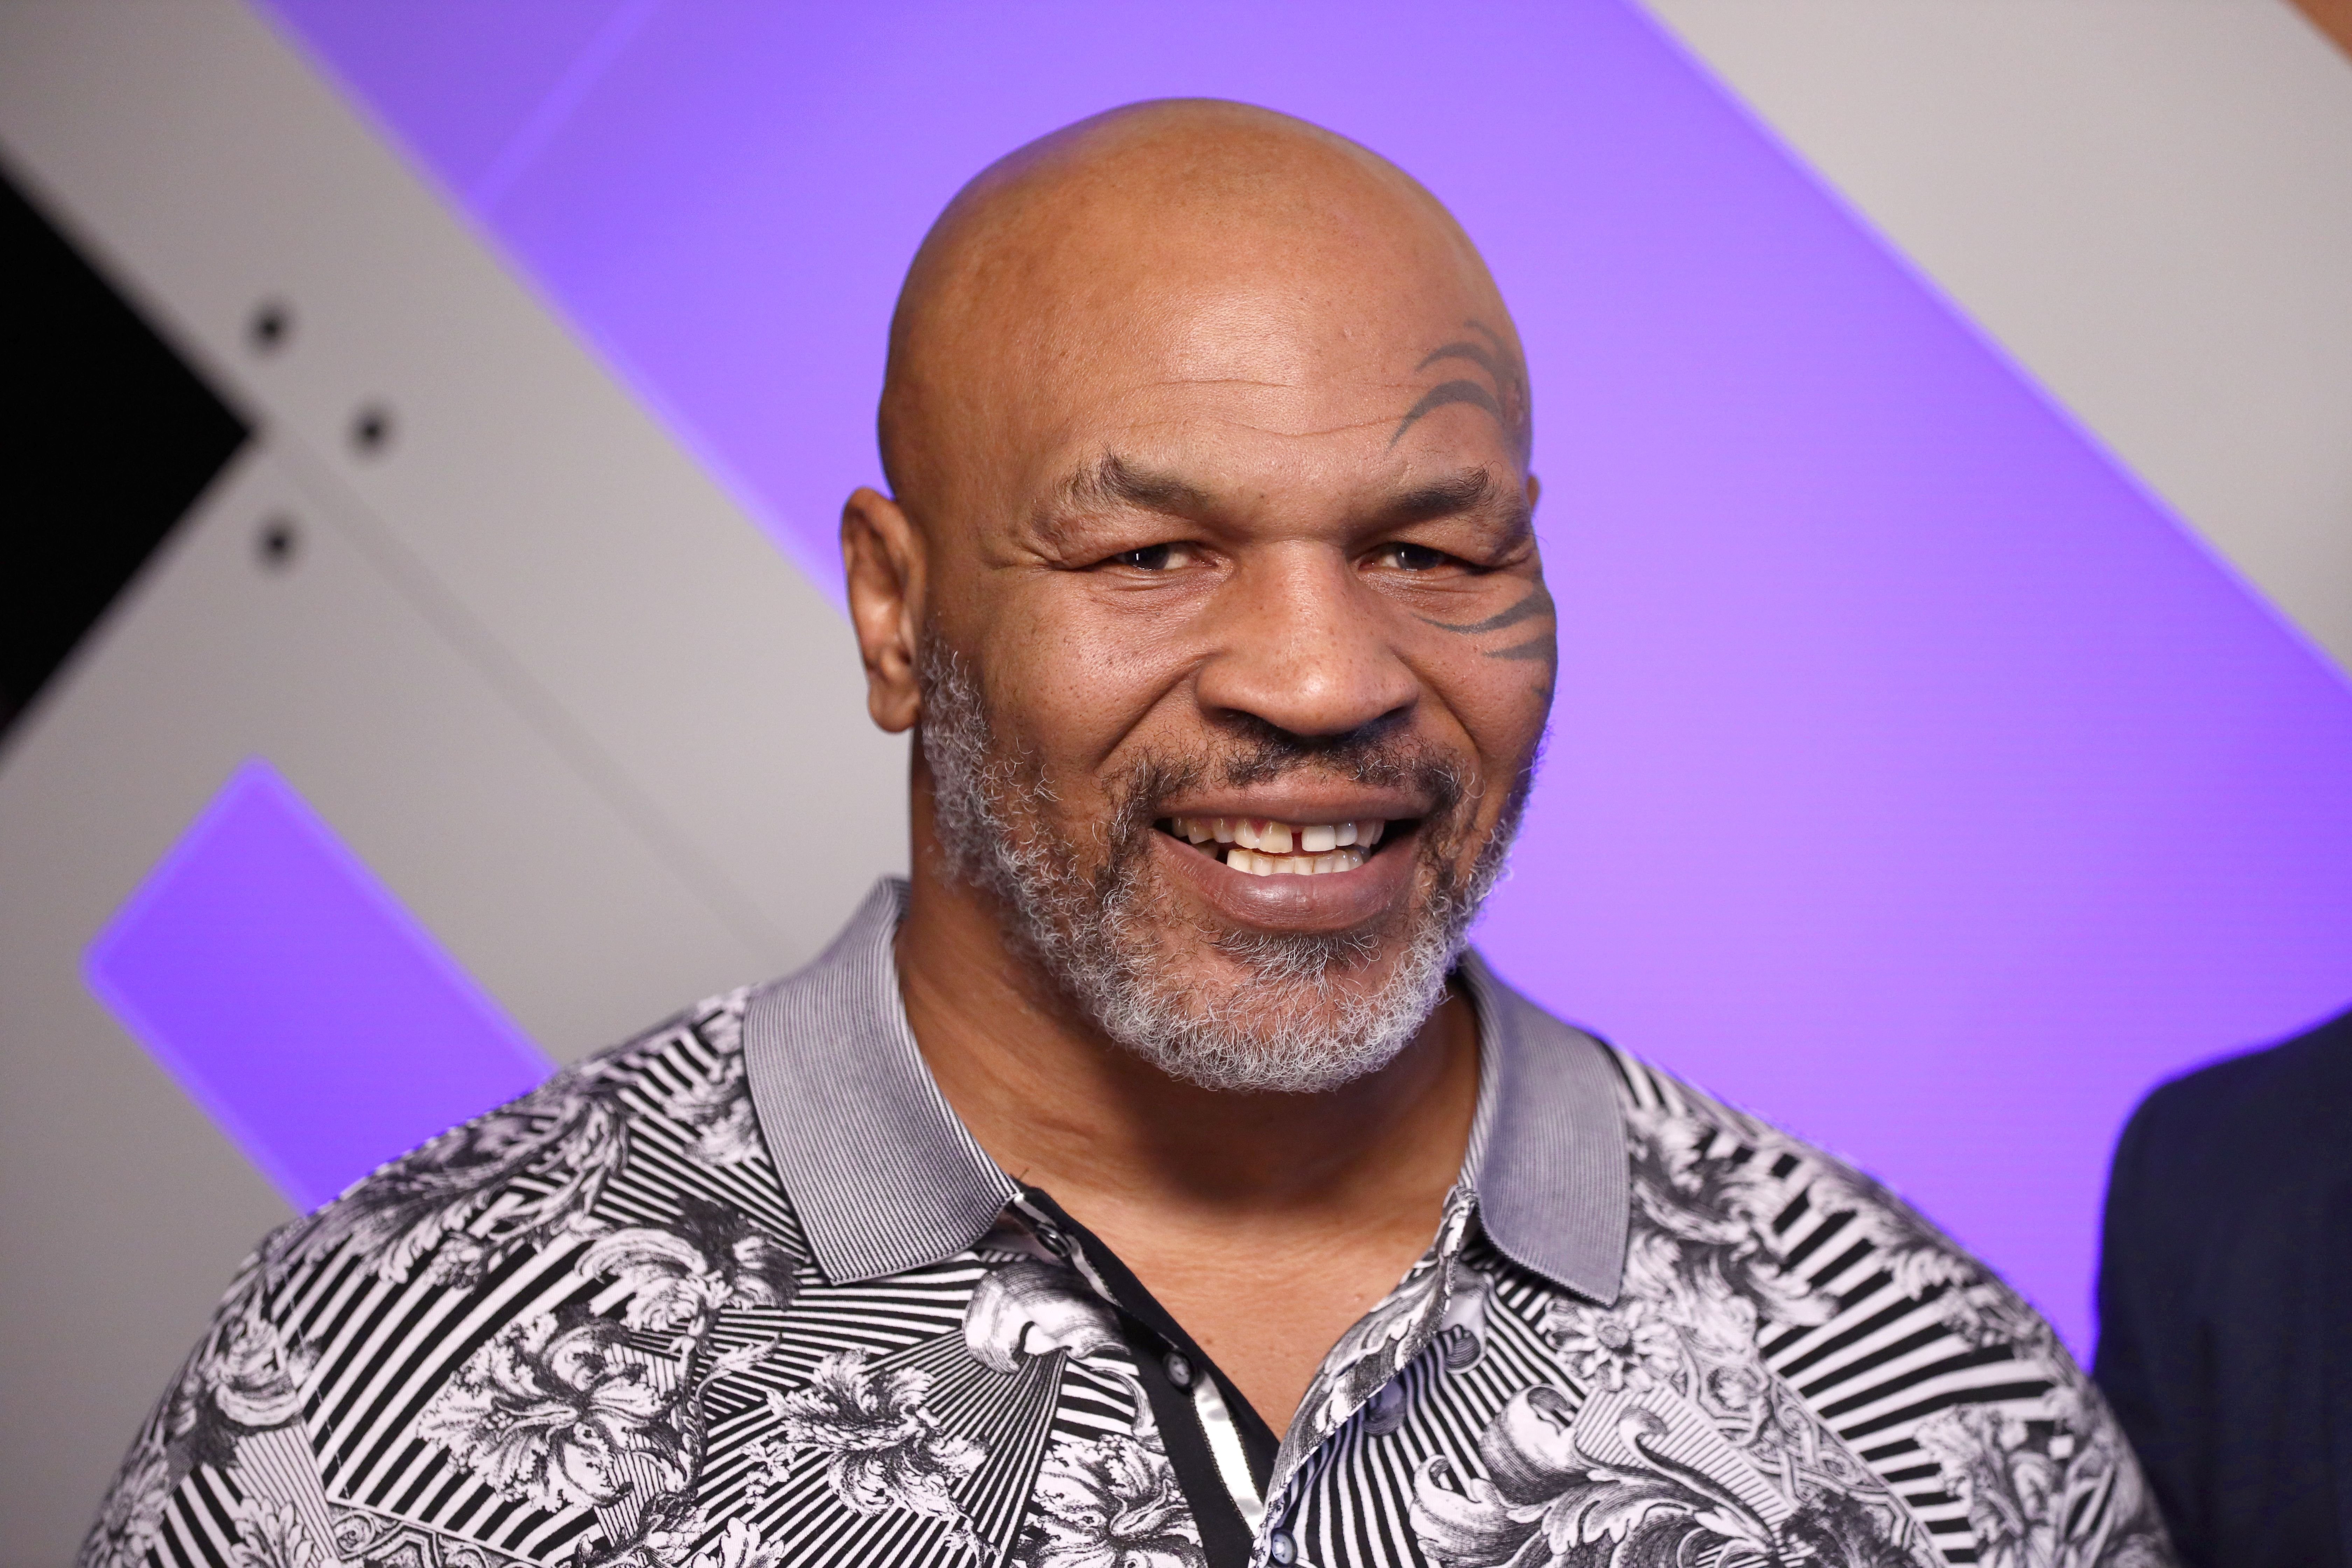 Mike Tyson during the 2019 iHeartRadio Podcast Awards Presented by Capital One at the iHeartRadio Theater LA on January 18, 2019 in Burbank, California. | Source: Getty Images